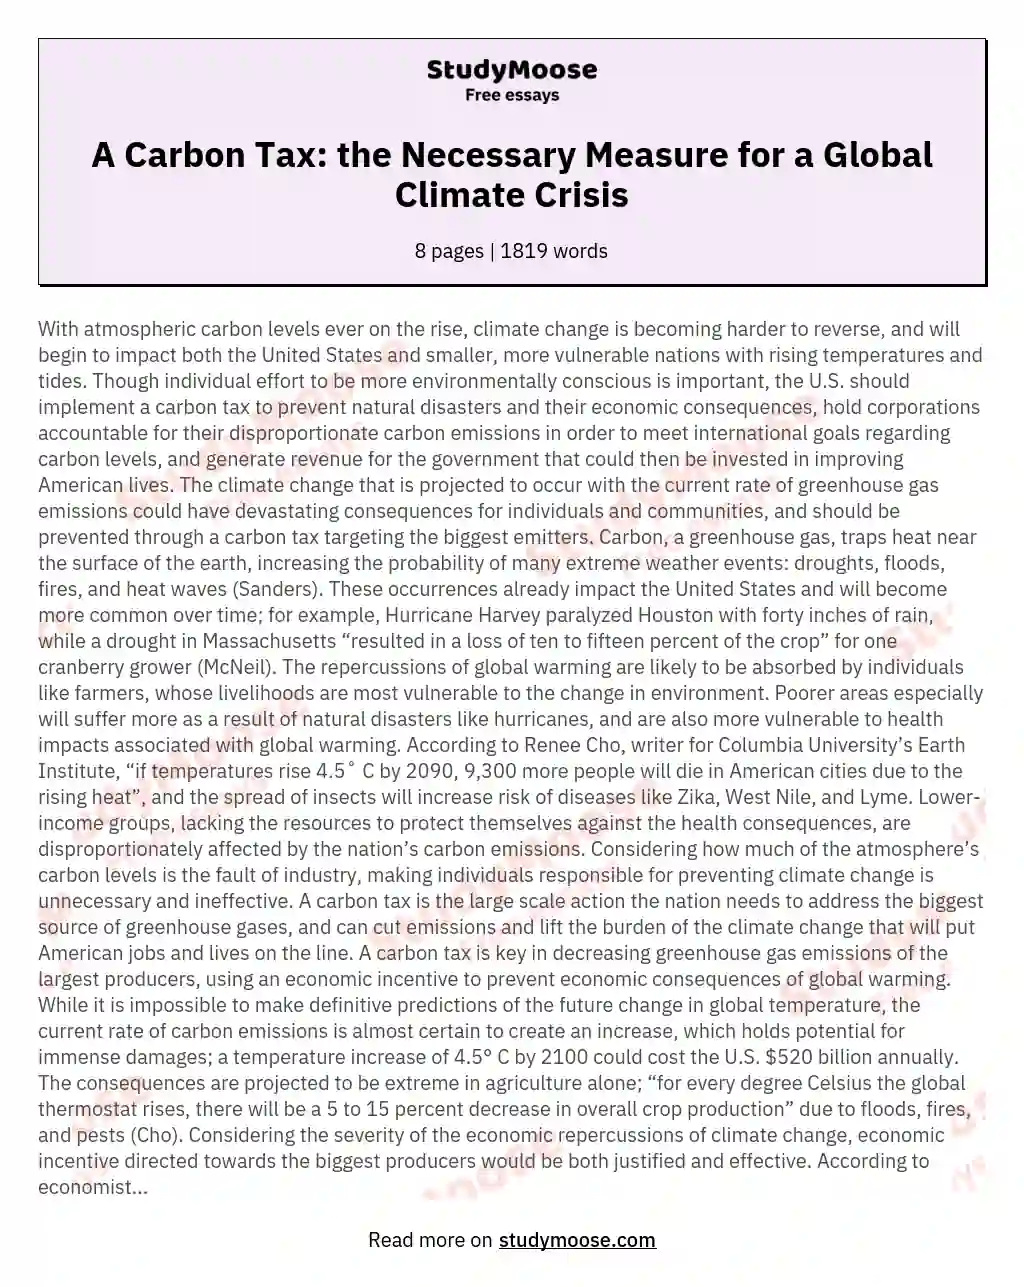 A Carbon Tax: the Necessary Measure for a Global Climate Crisis essay